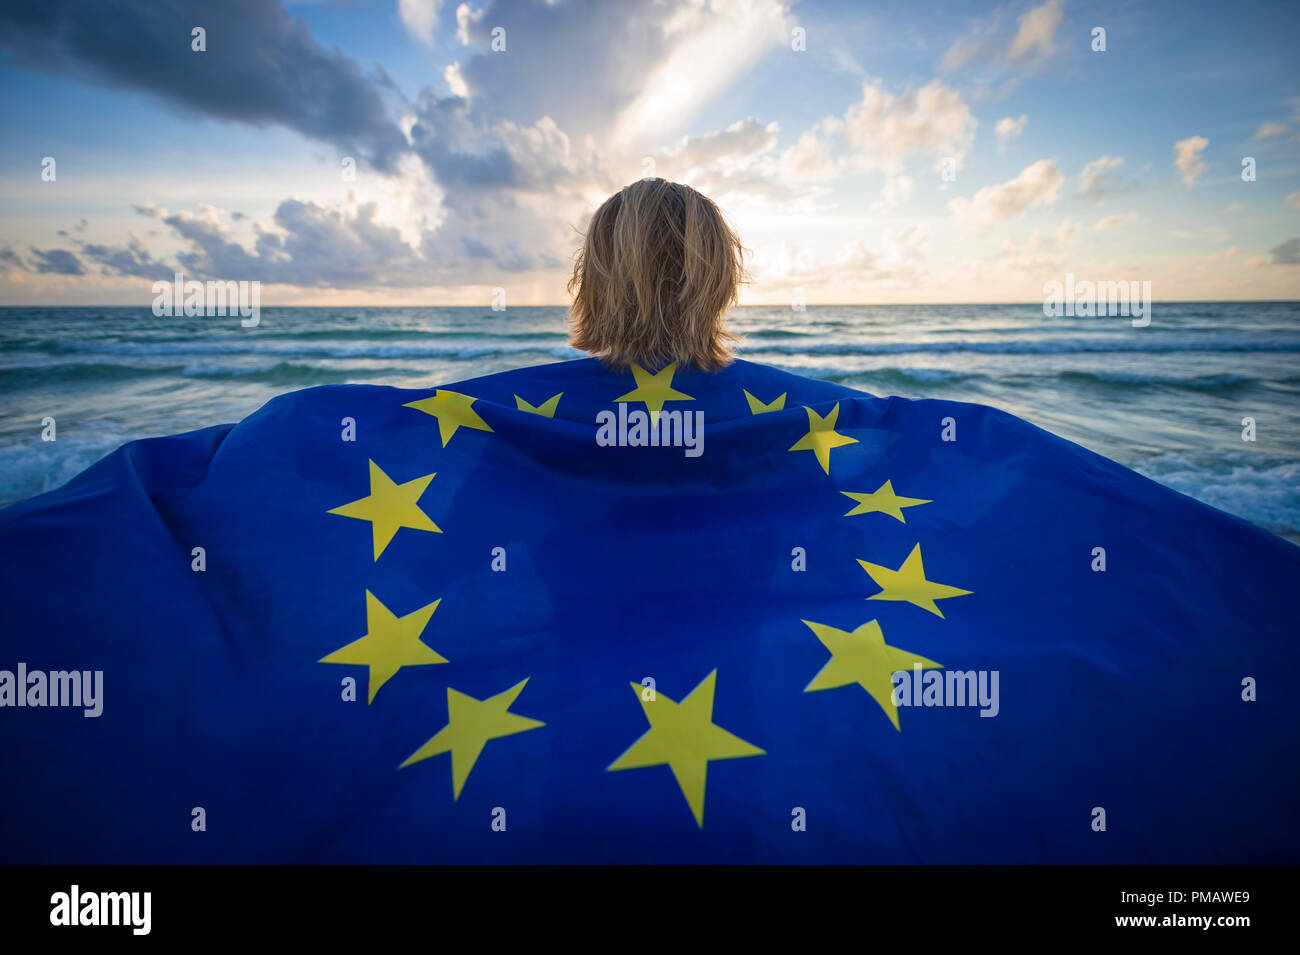 Man holding a fluttering iconic EU flag with circle of stars on beach with stormy turbulent seas in the channel at sunrise Stock Photo